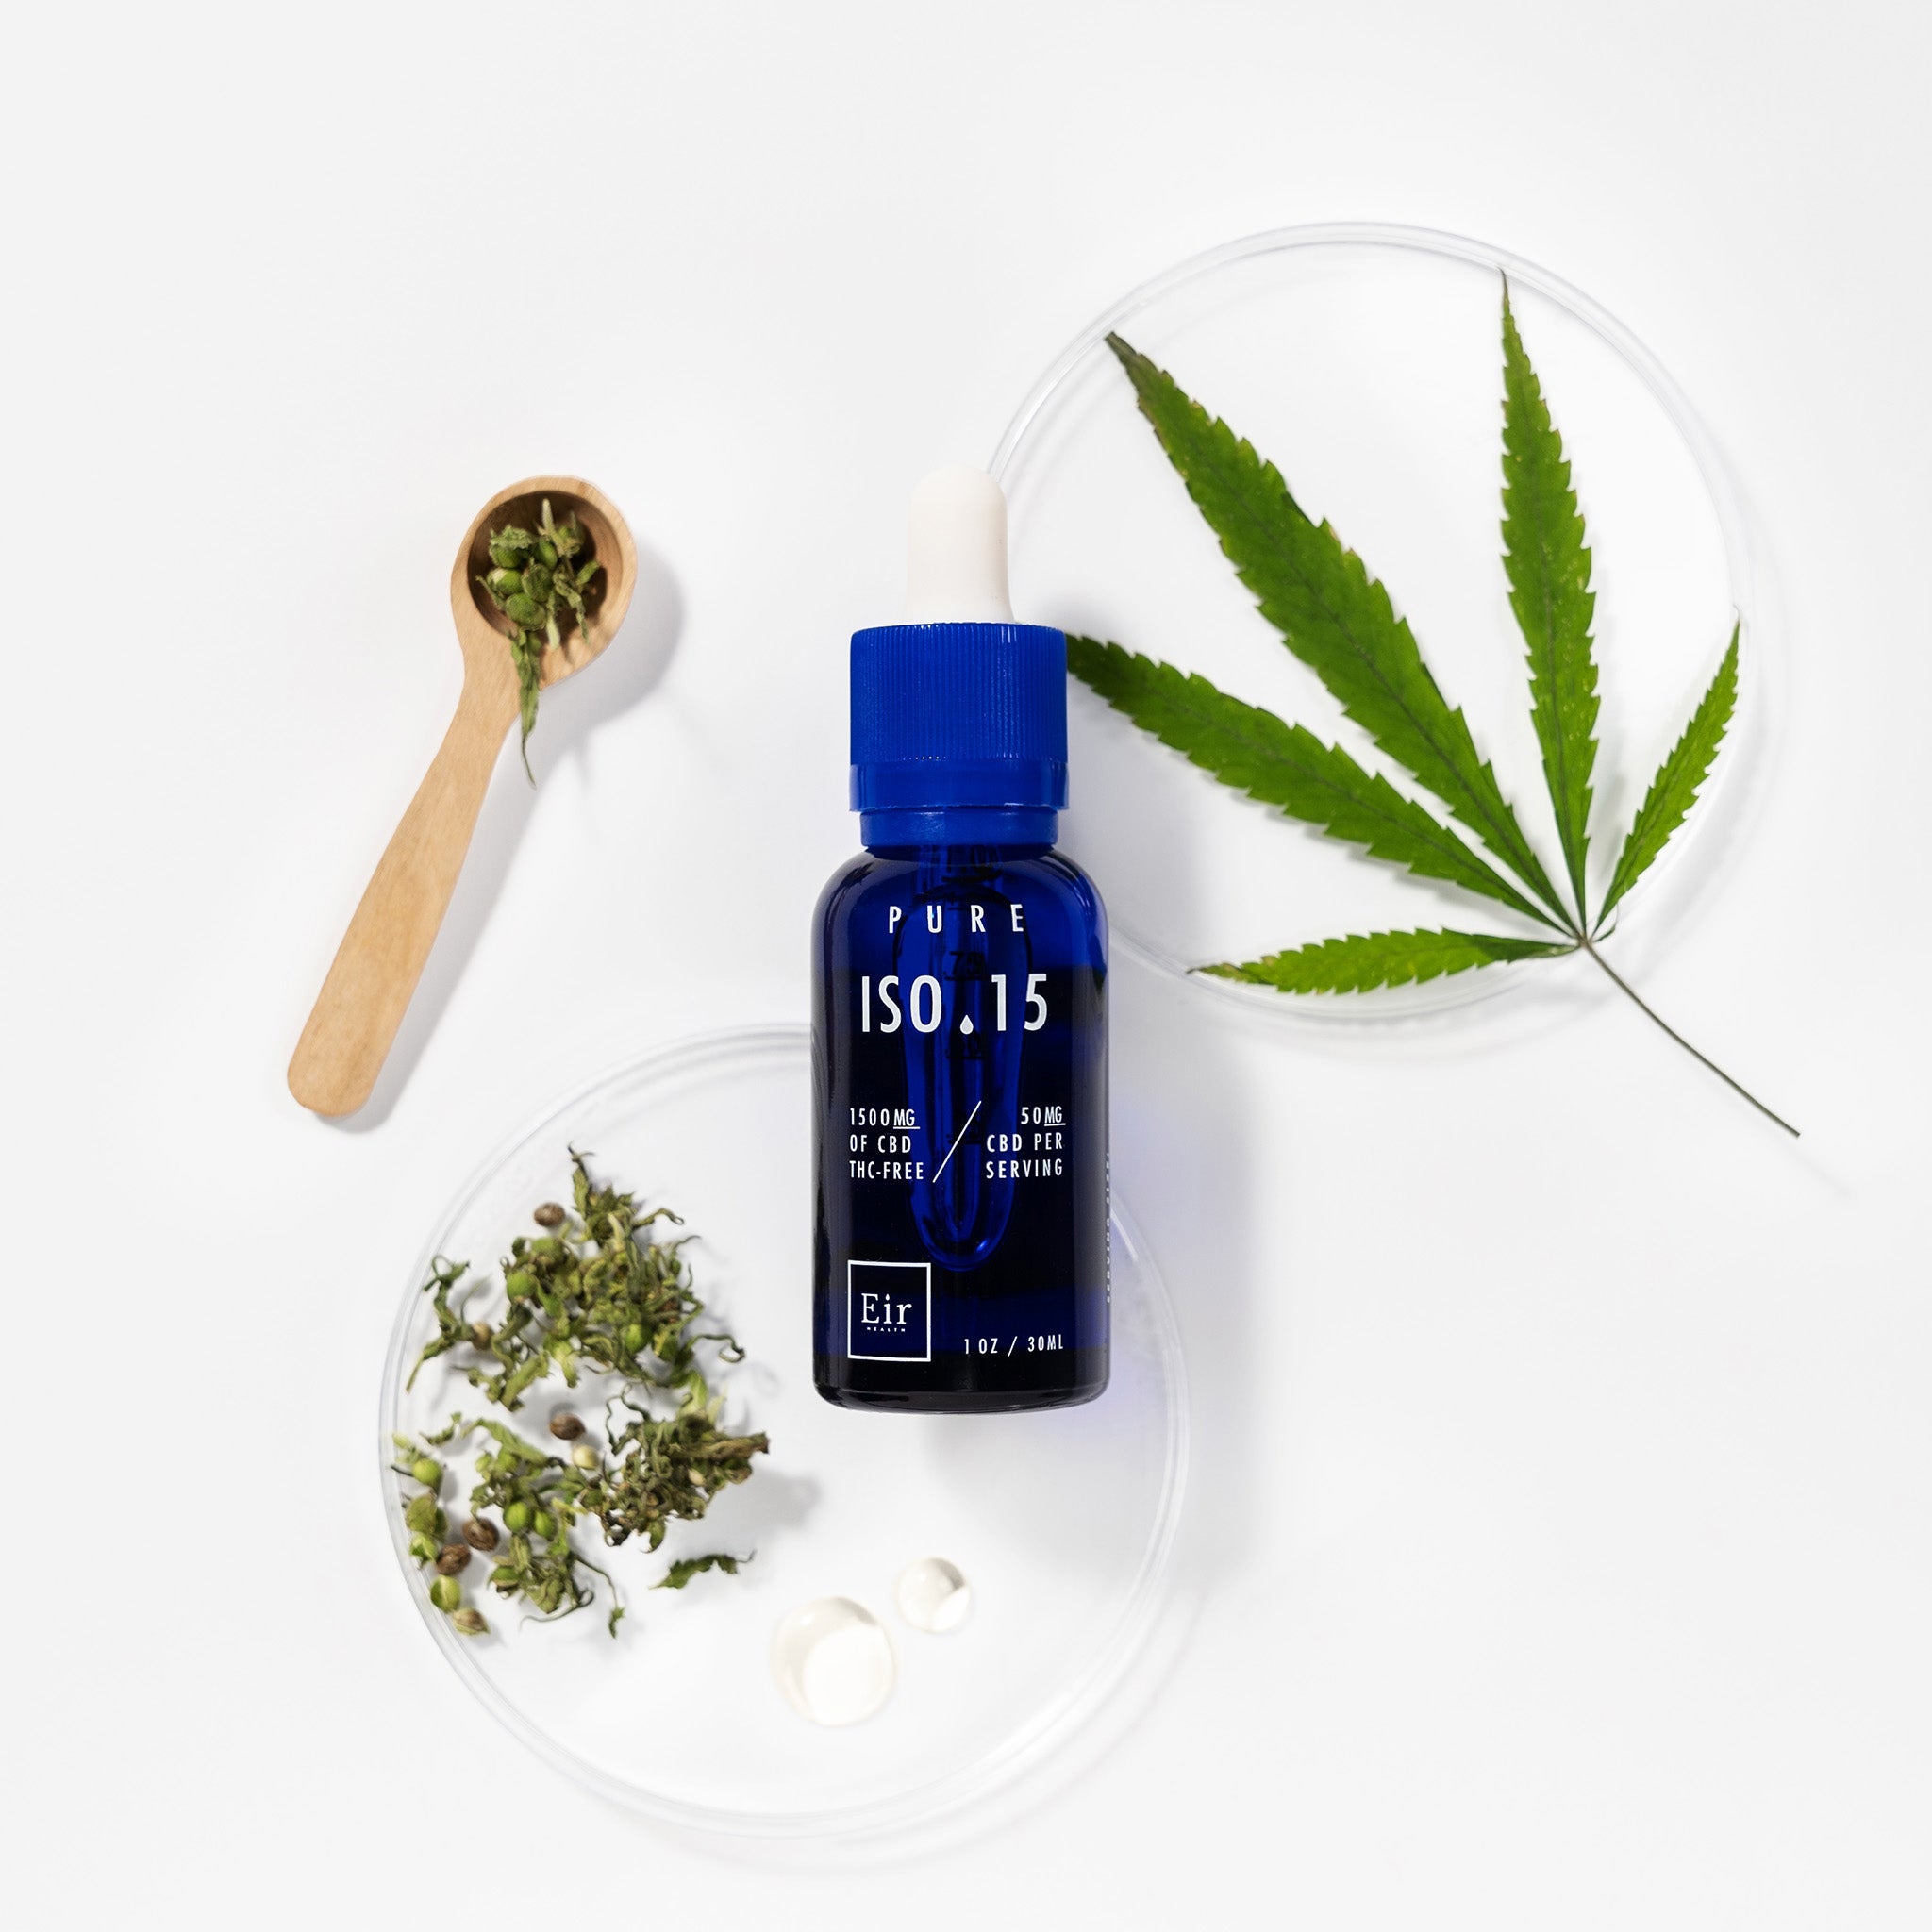 Bottle of CBD oil ISO 15 against a background of green cannabis leaves and a wooden spoon with dried herbs.